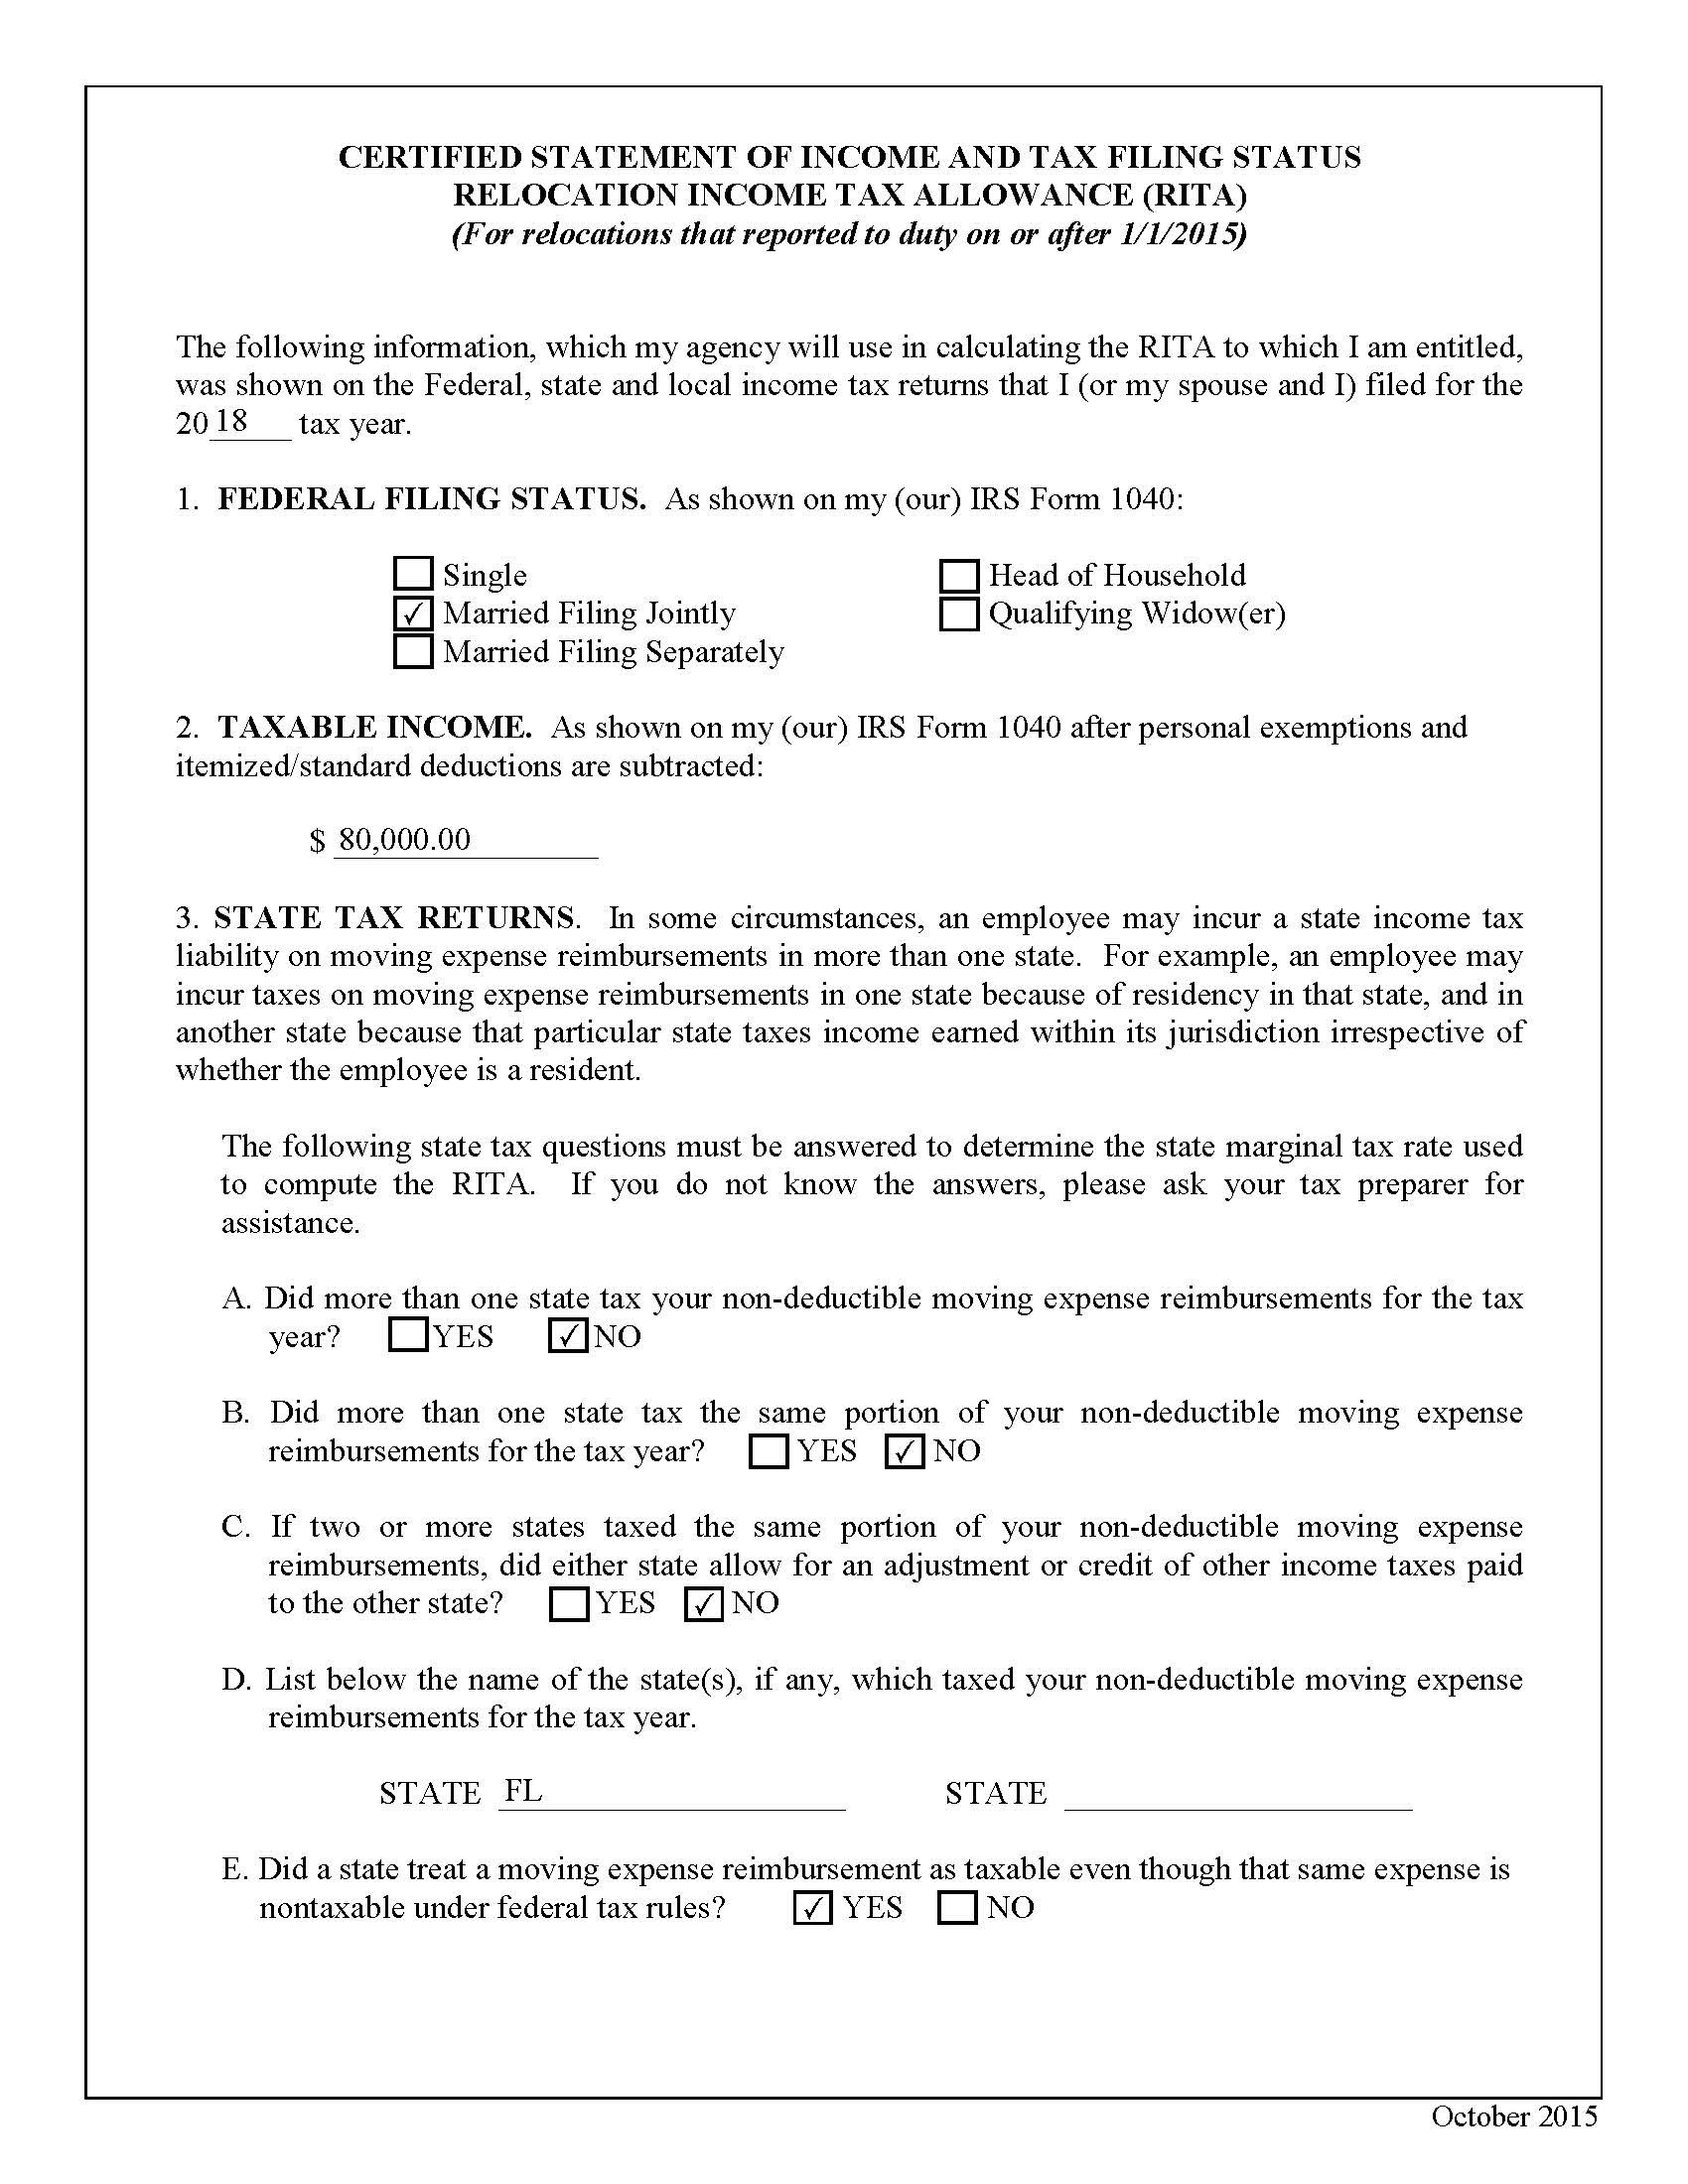 Relocation Income Tax Allowance (RITA) Certification Form Page 1